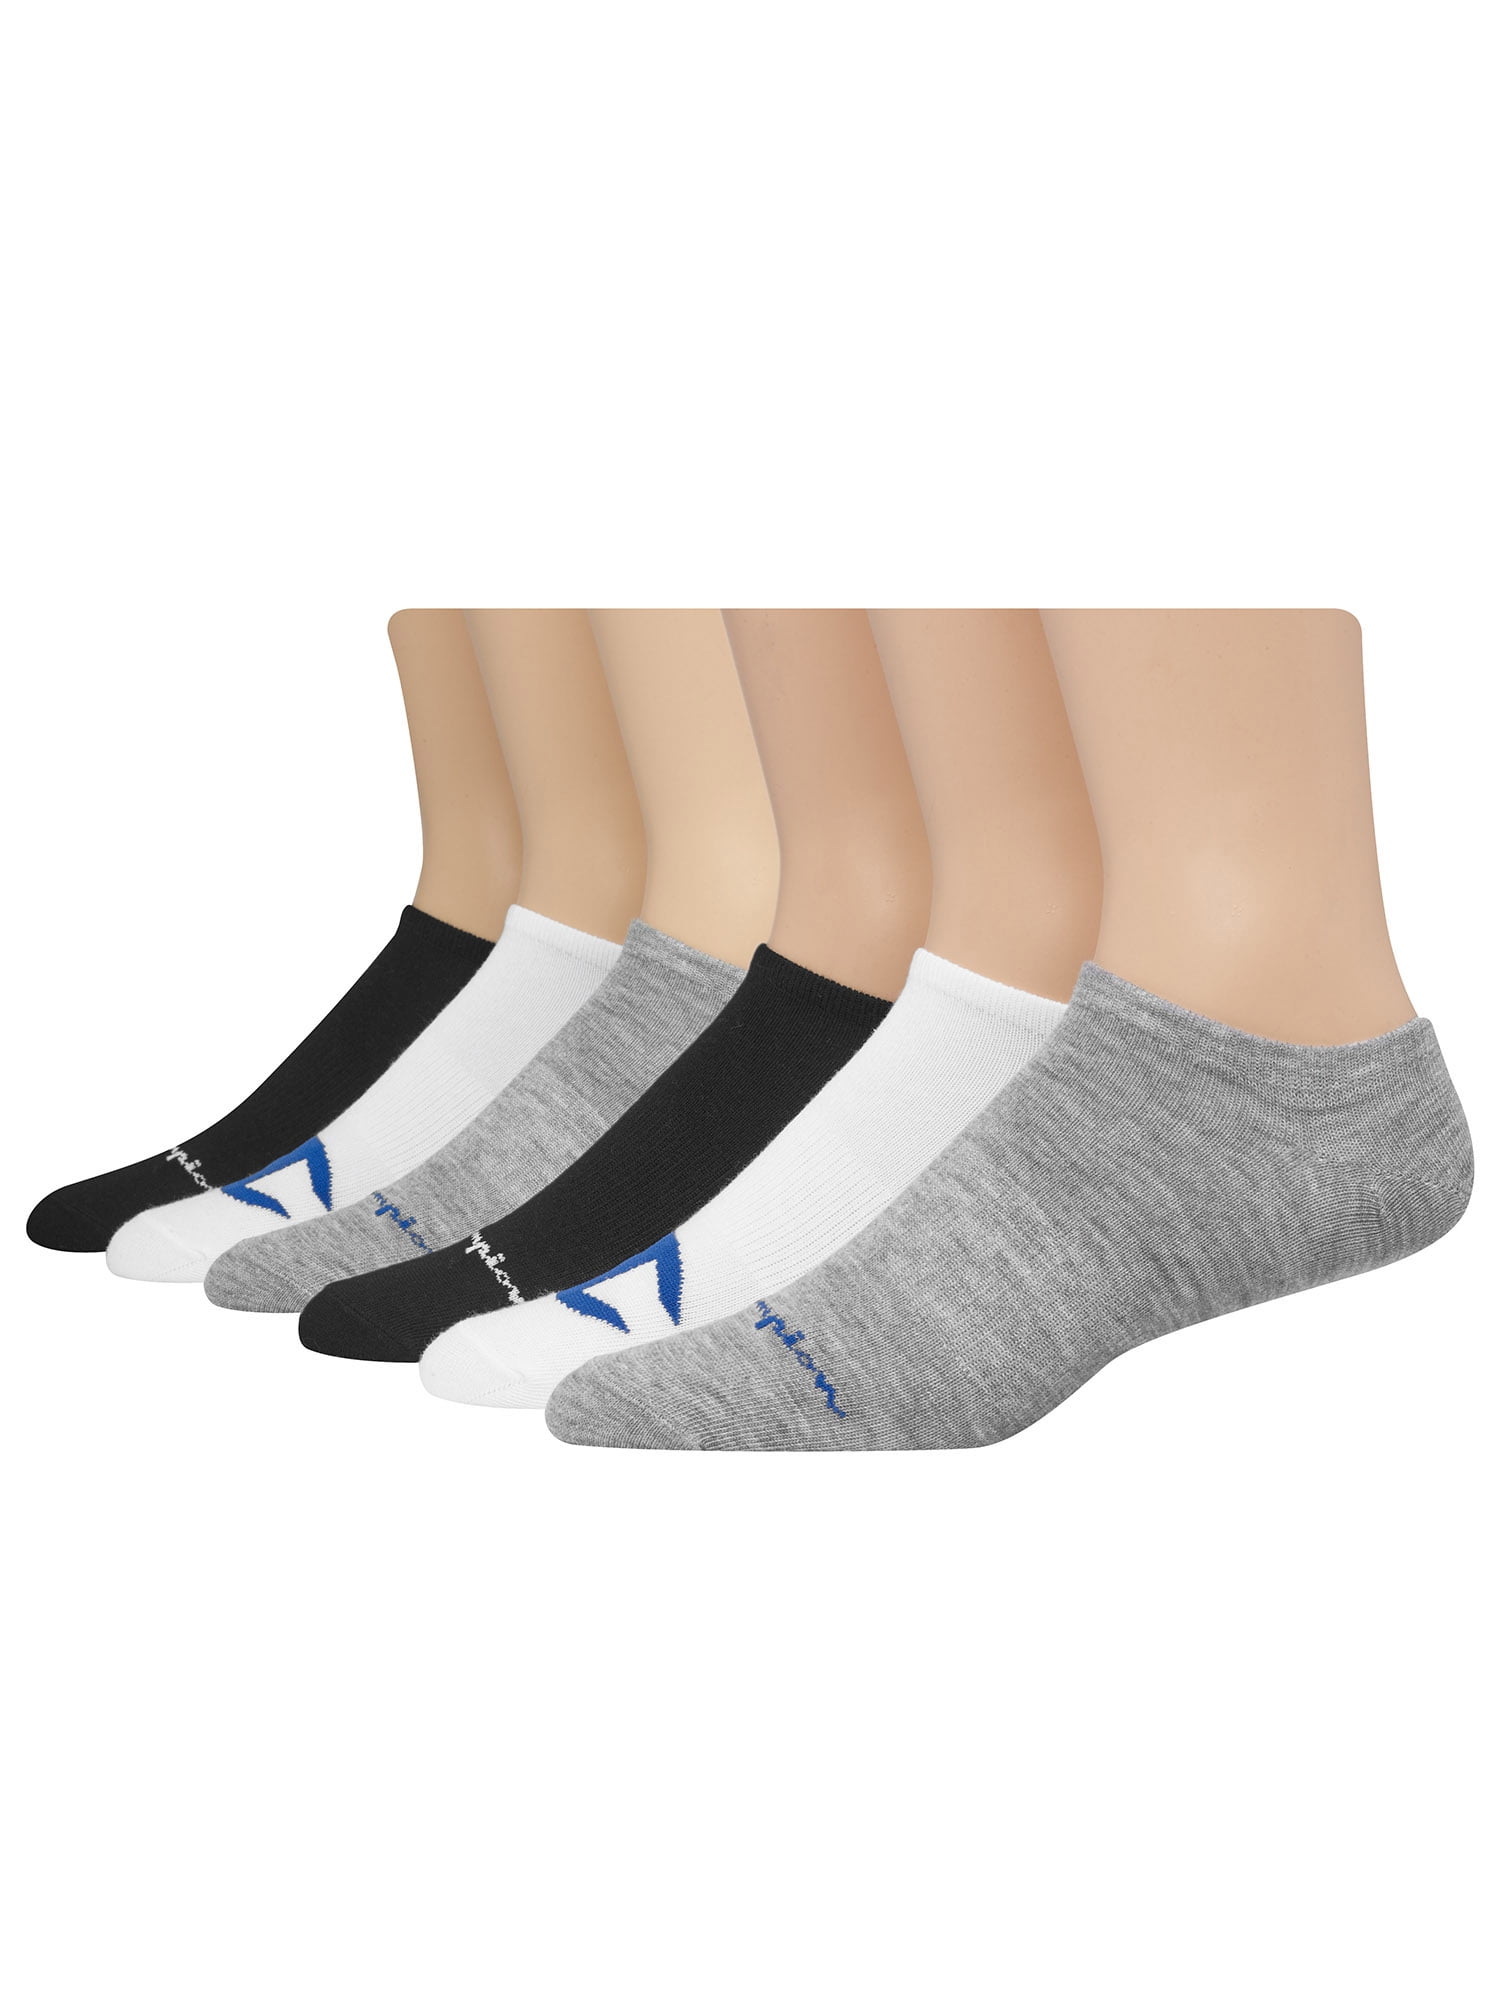 Men's Champion Performance no show ankle socks 6 pair Size 6-12 New 